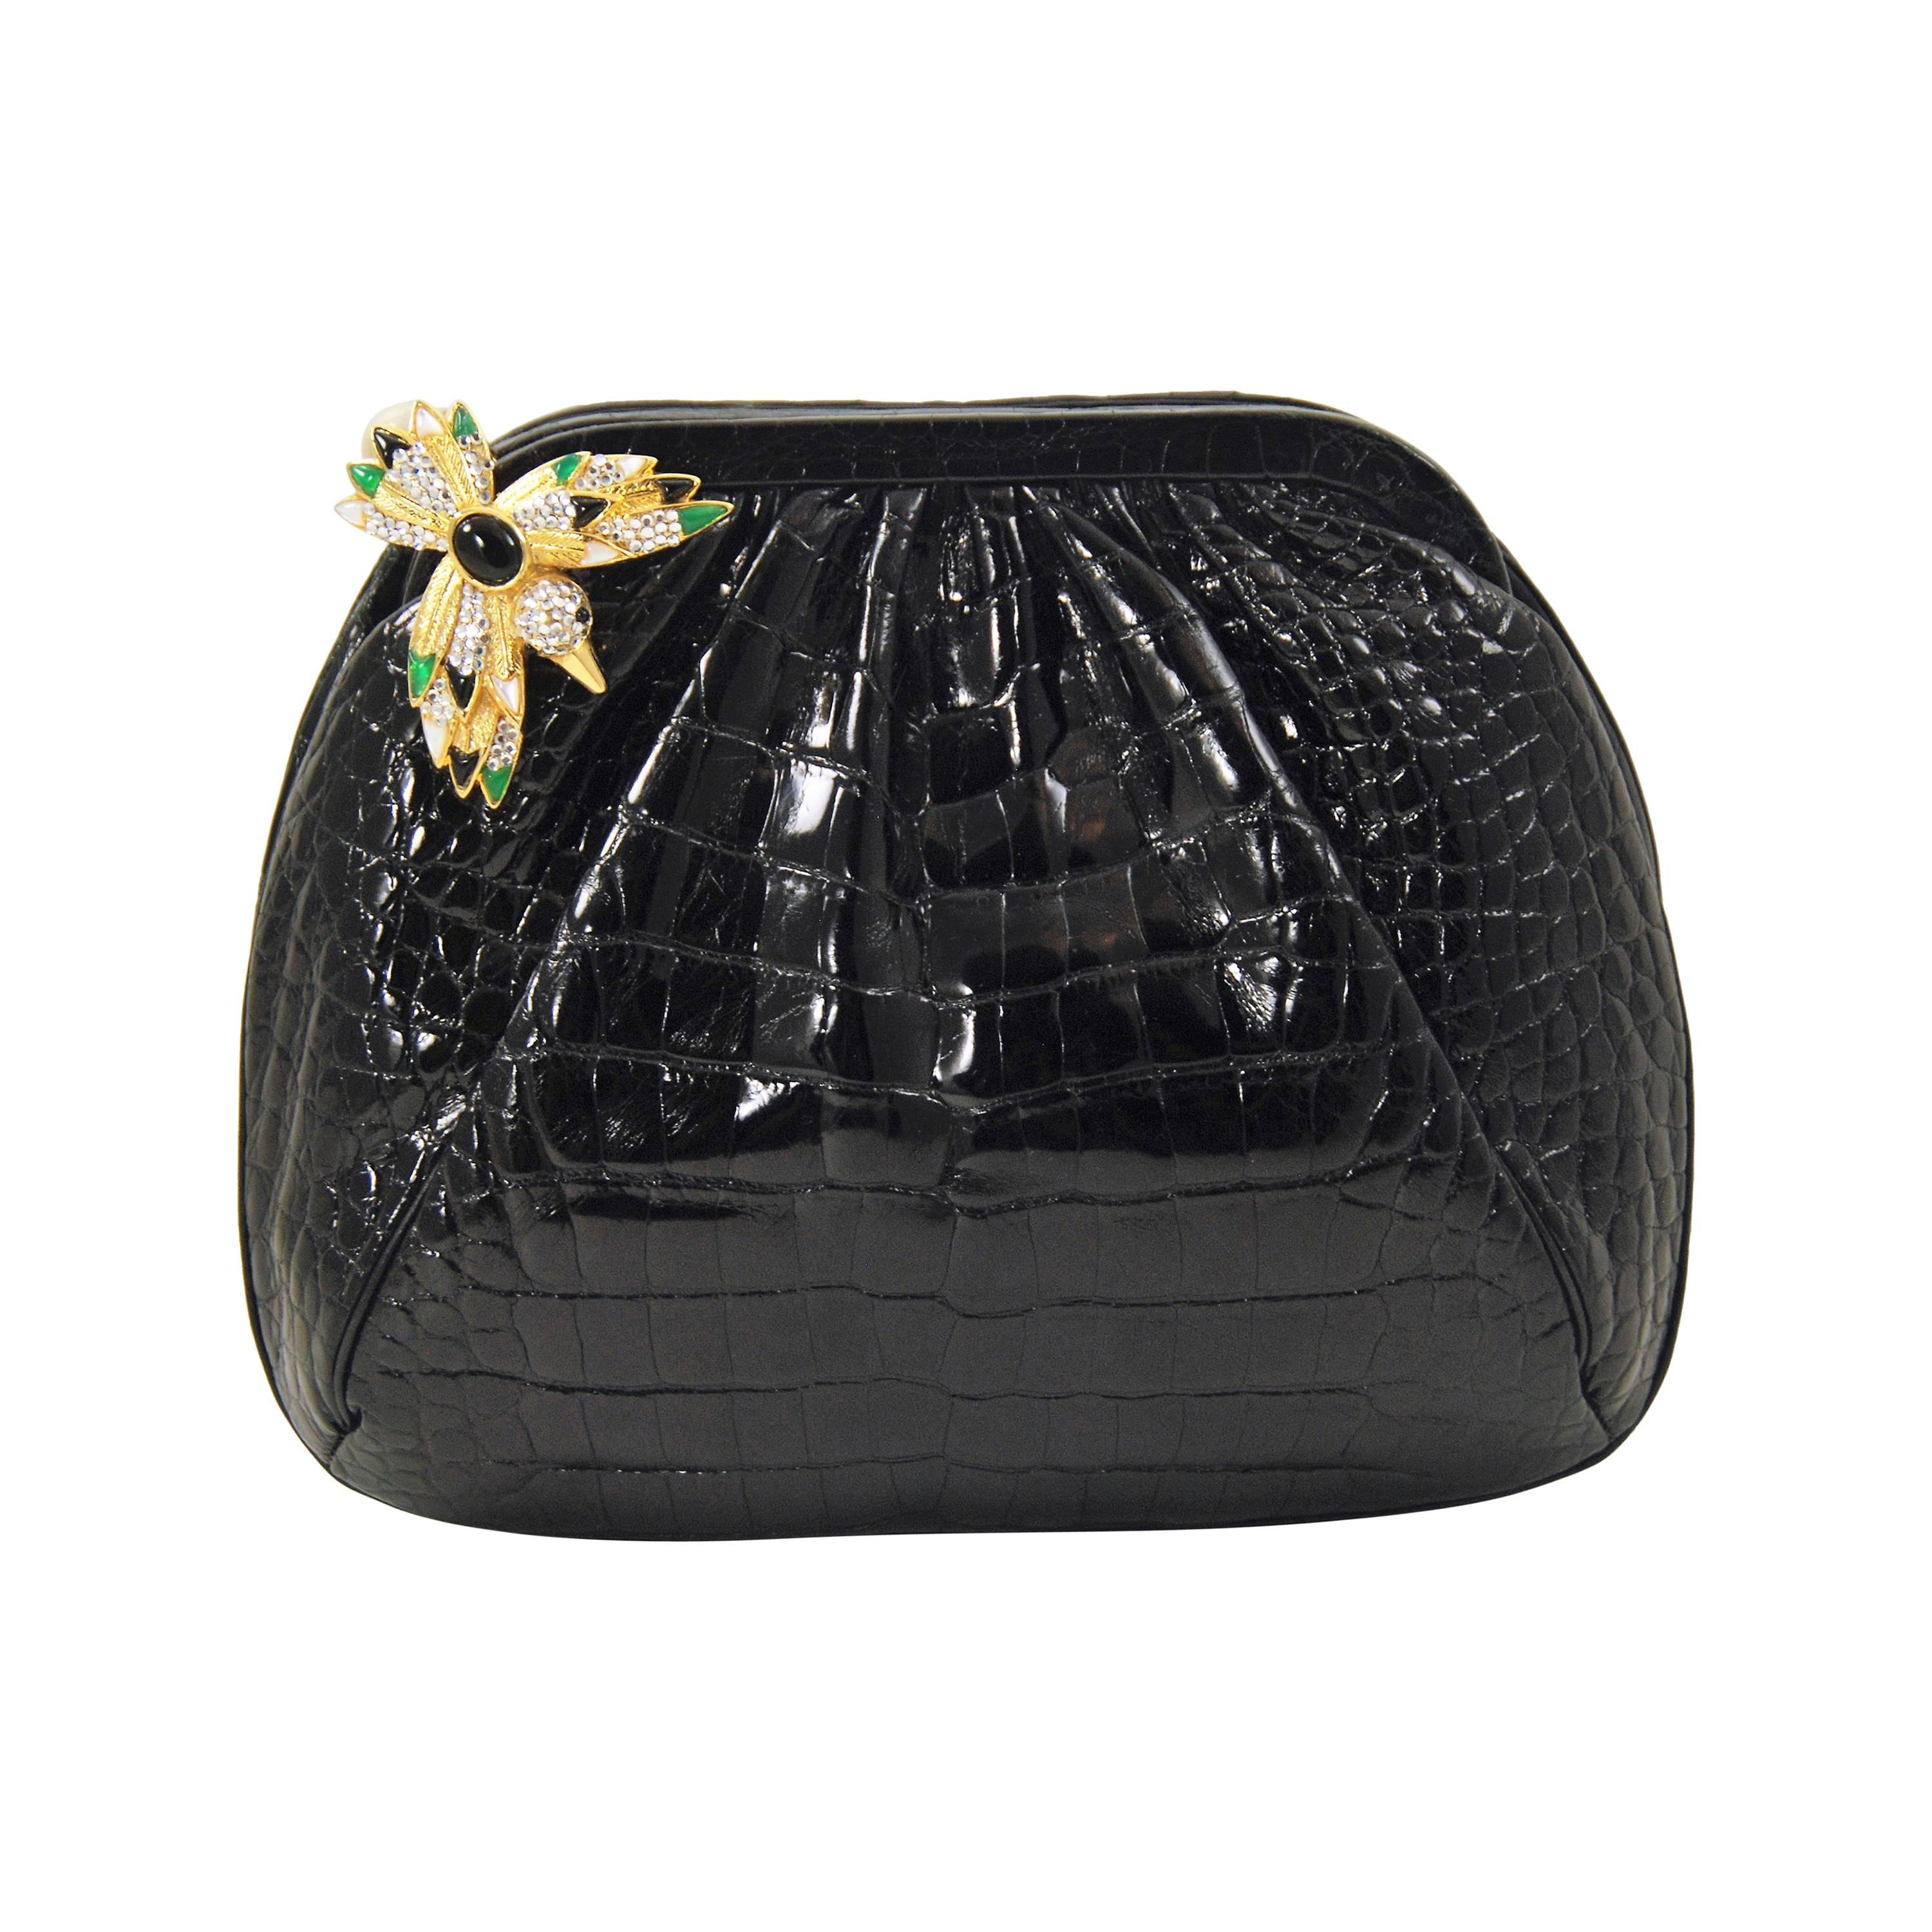 1980s Judith Leiber Black Alligator Bag with Jeweled and Enamel Clasp